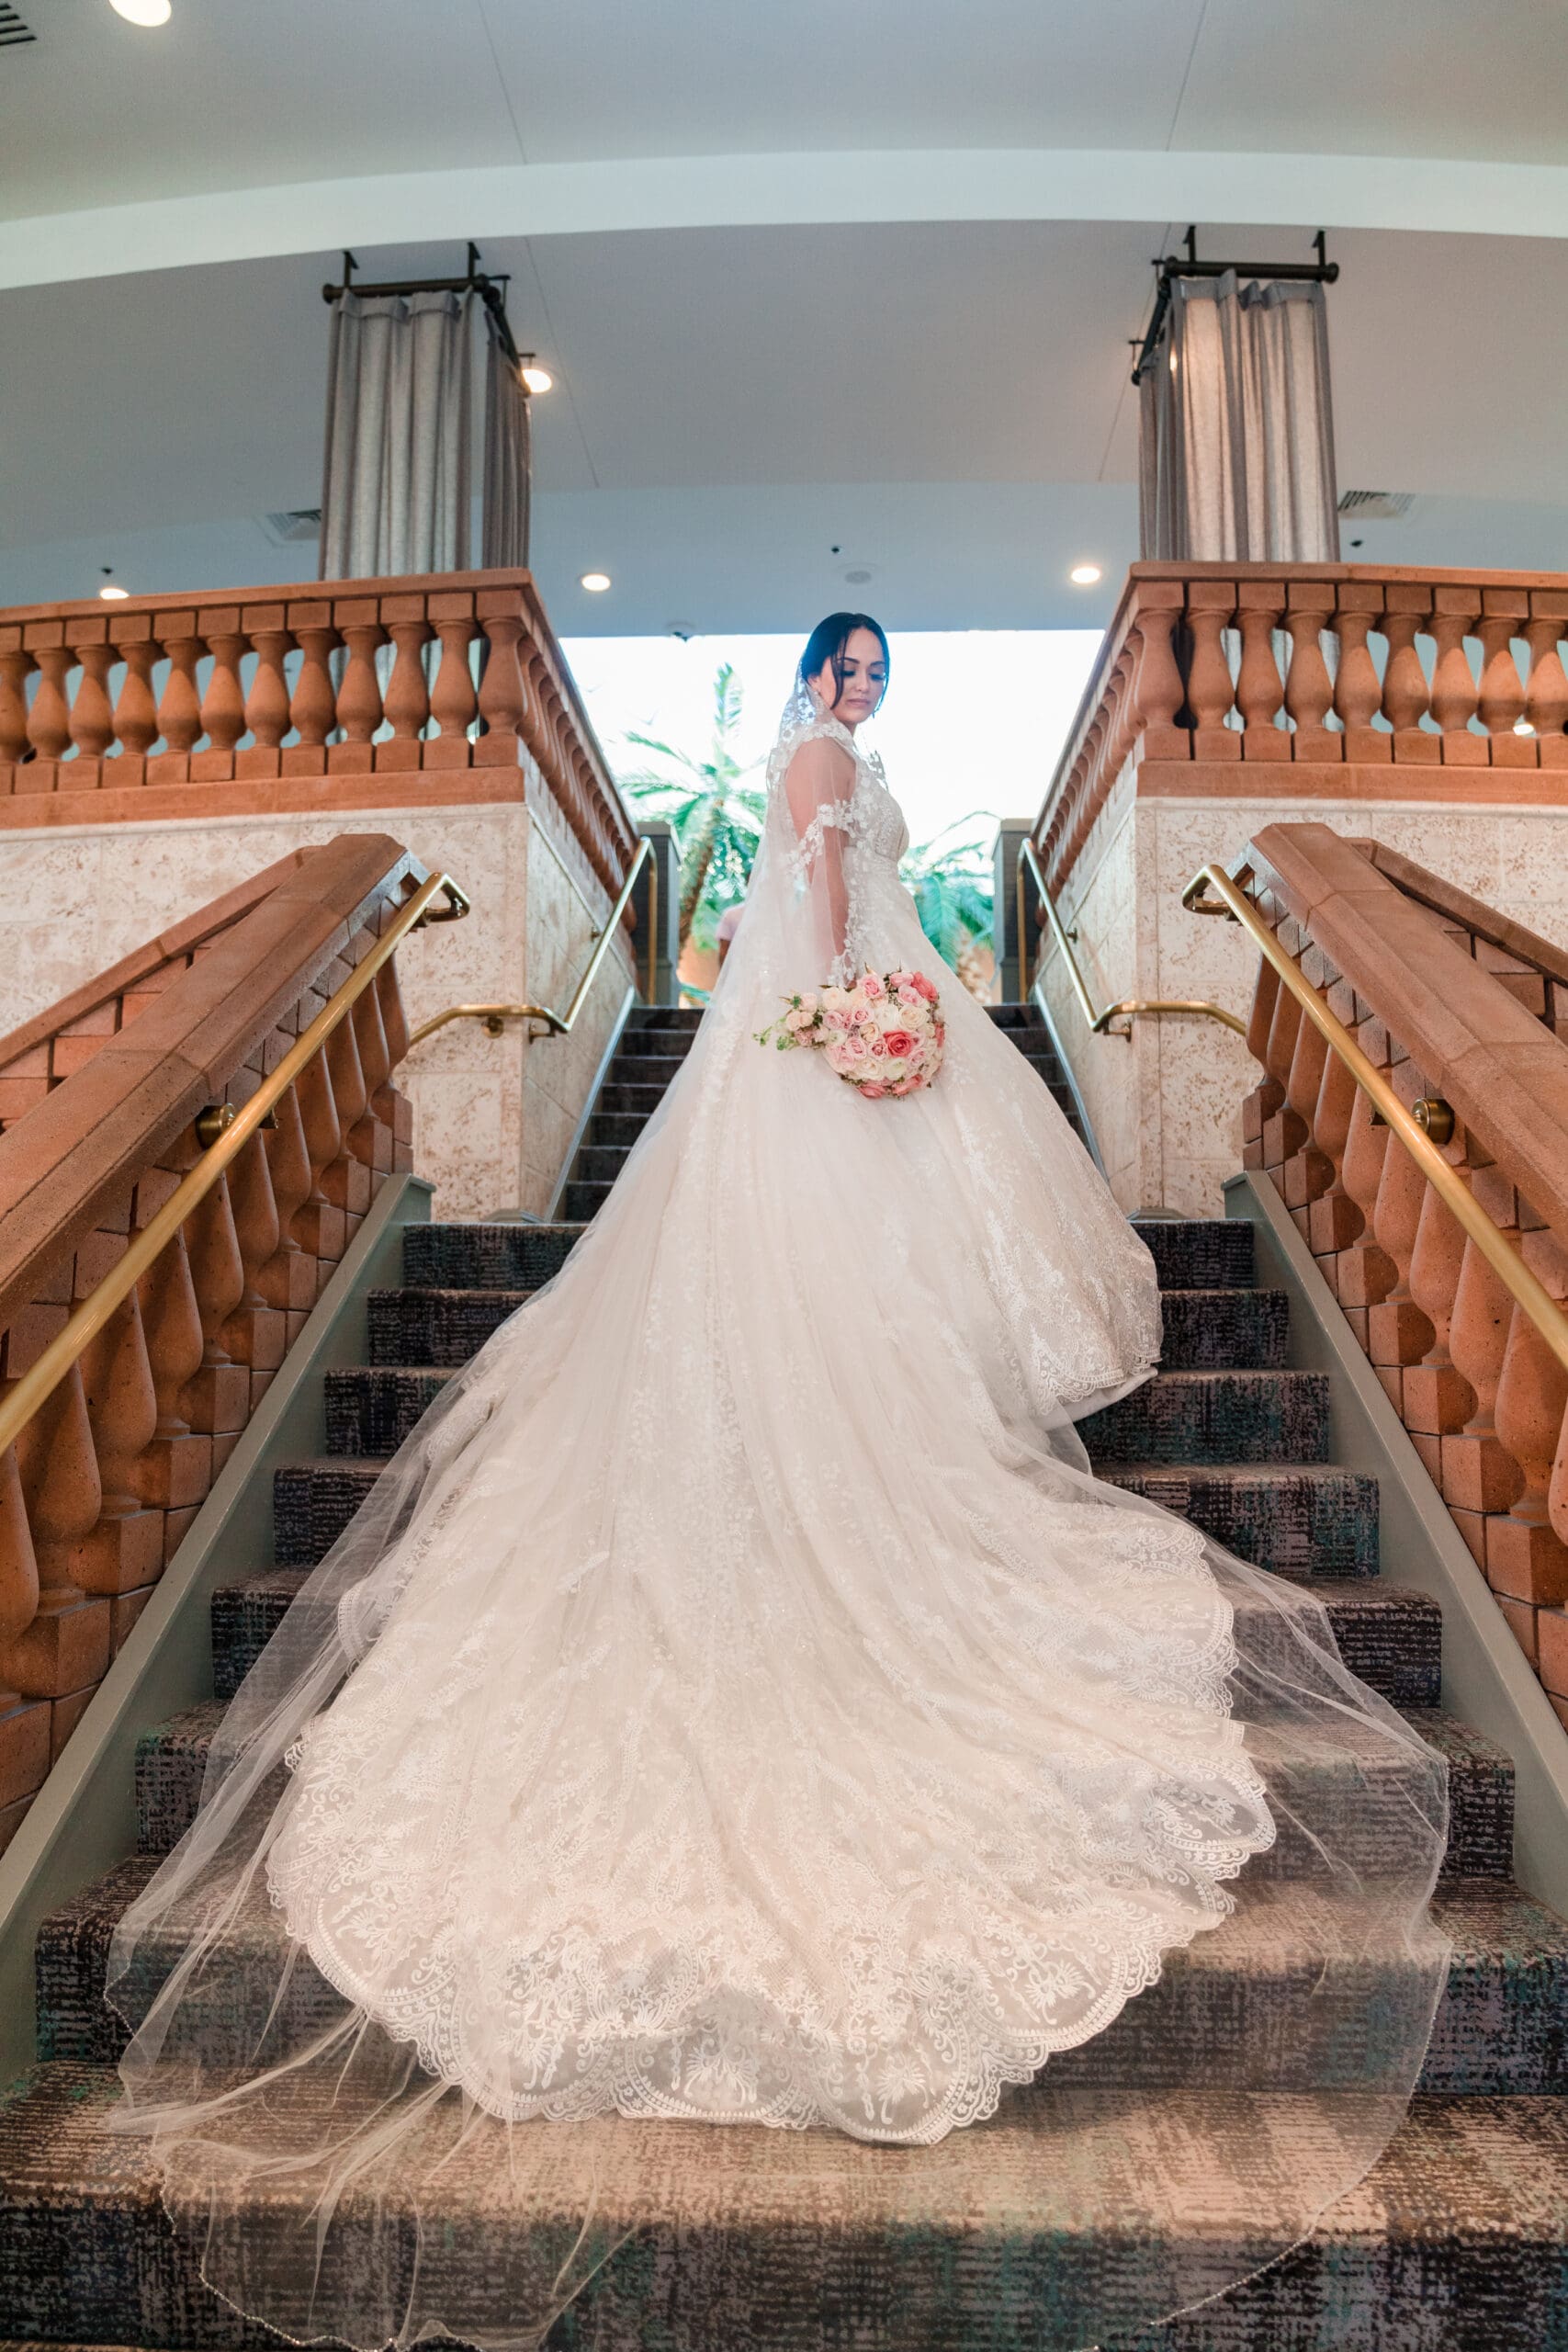 Jessica standing at the top of the stairs at Caribe Royale Orlando, her dress flowing gracefully down the stairs.